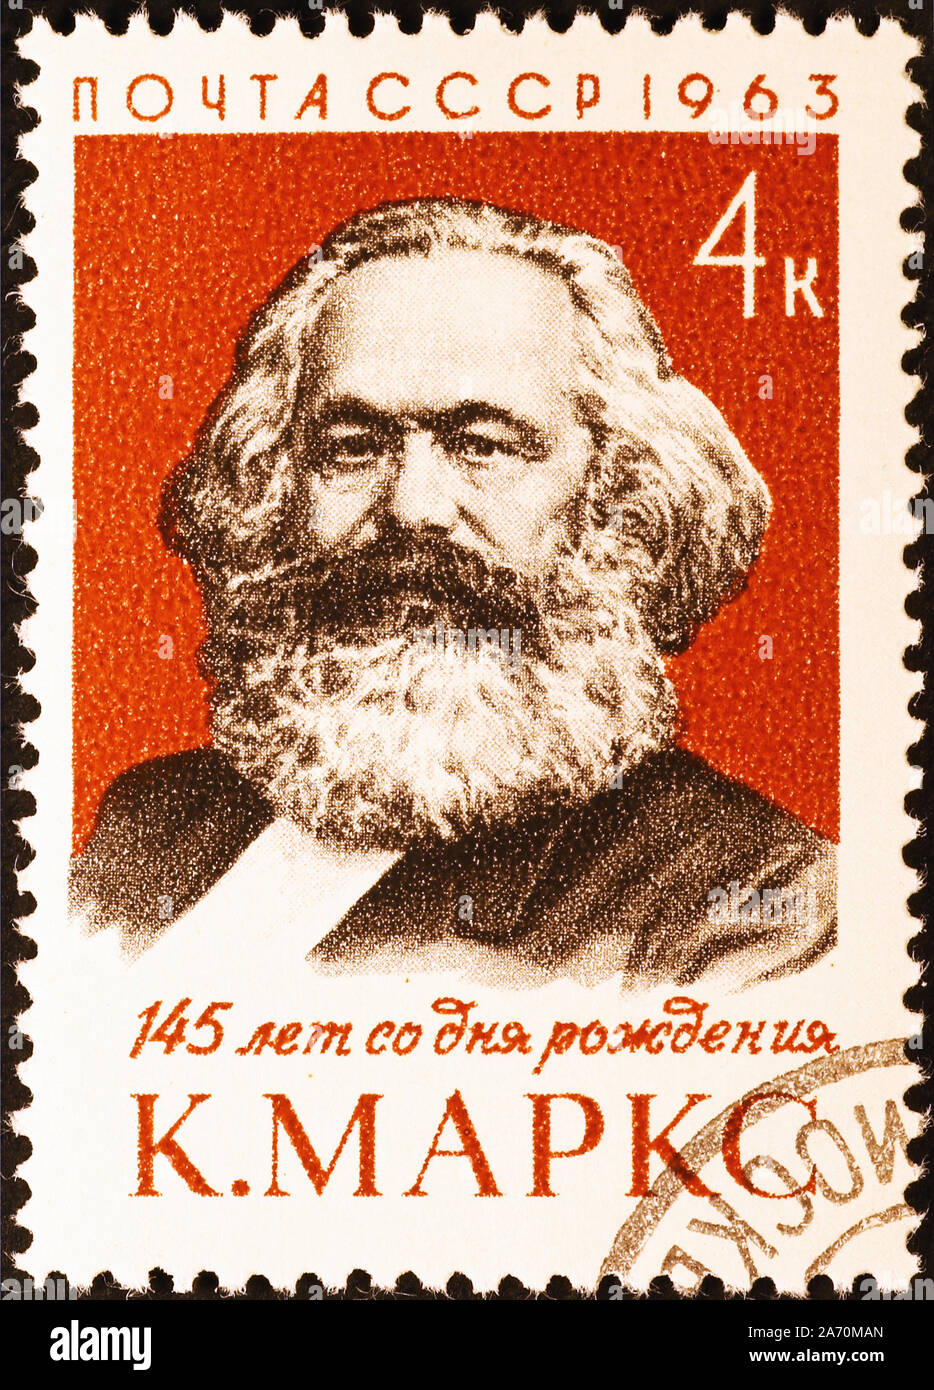 Karl Marx on old russian postage stamp Stock Photo